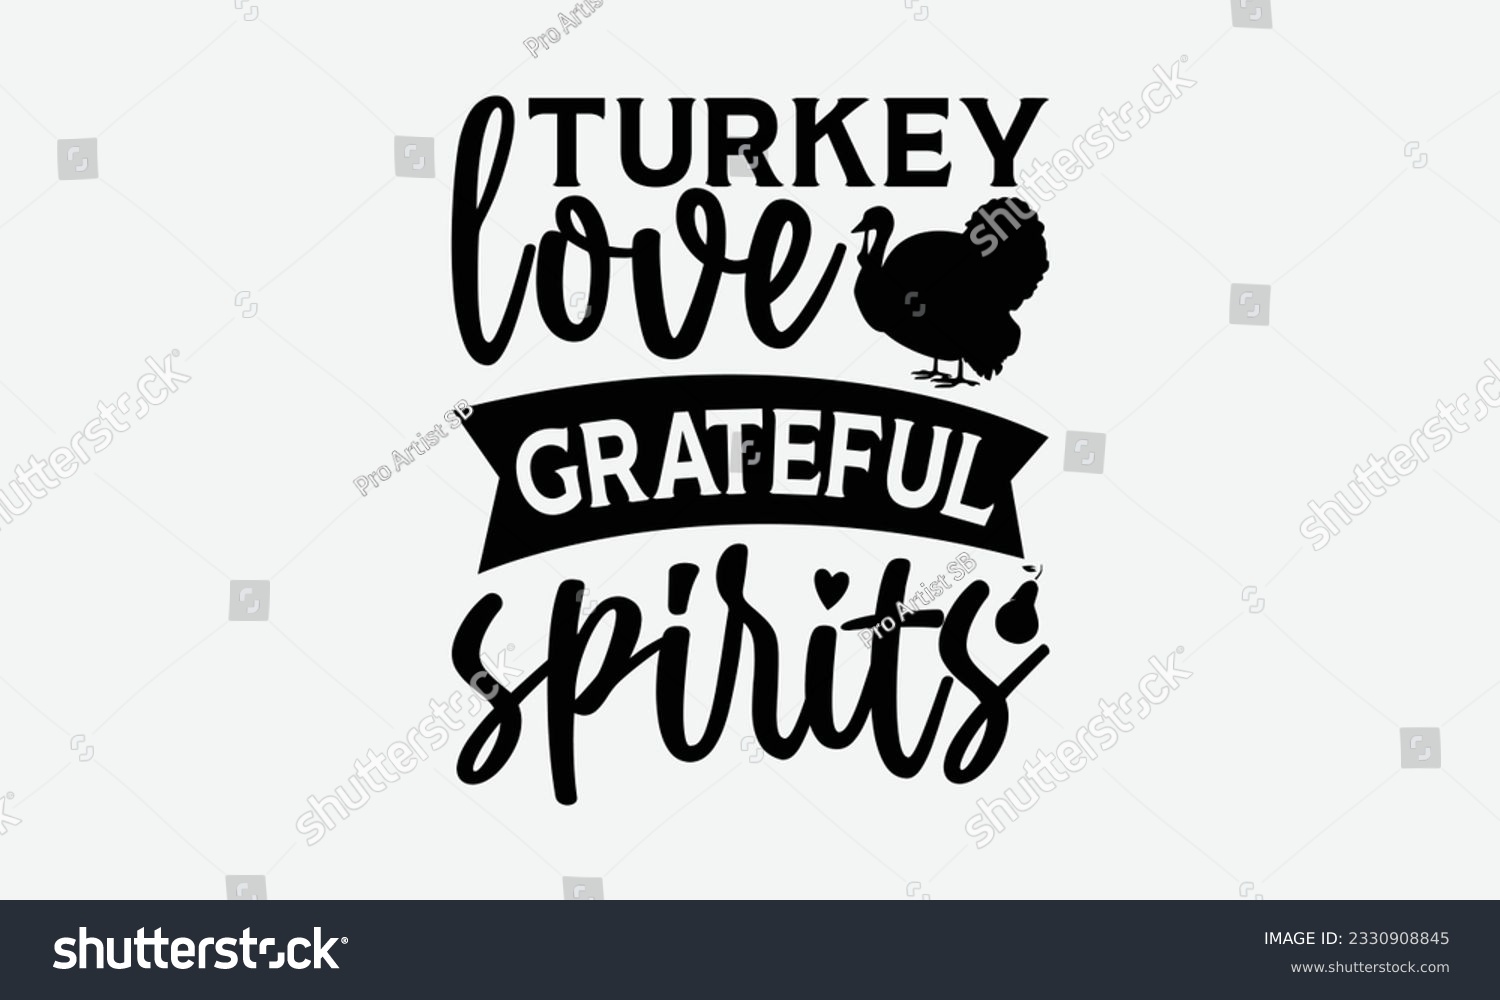 SVG of Turkey Love Grateful Spirits - Thanksgiving T-shirt Design Template, Happy Turkey Day SVG Quotes, Hand Drawn Lettering Phrase Isolated On White Background. svg